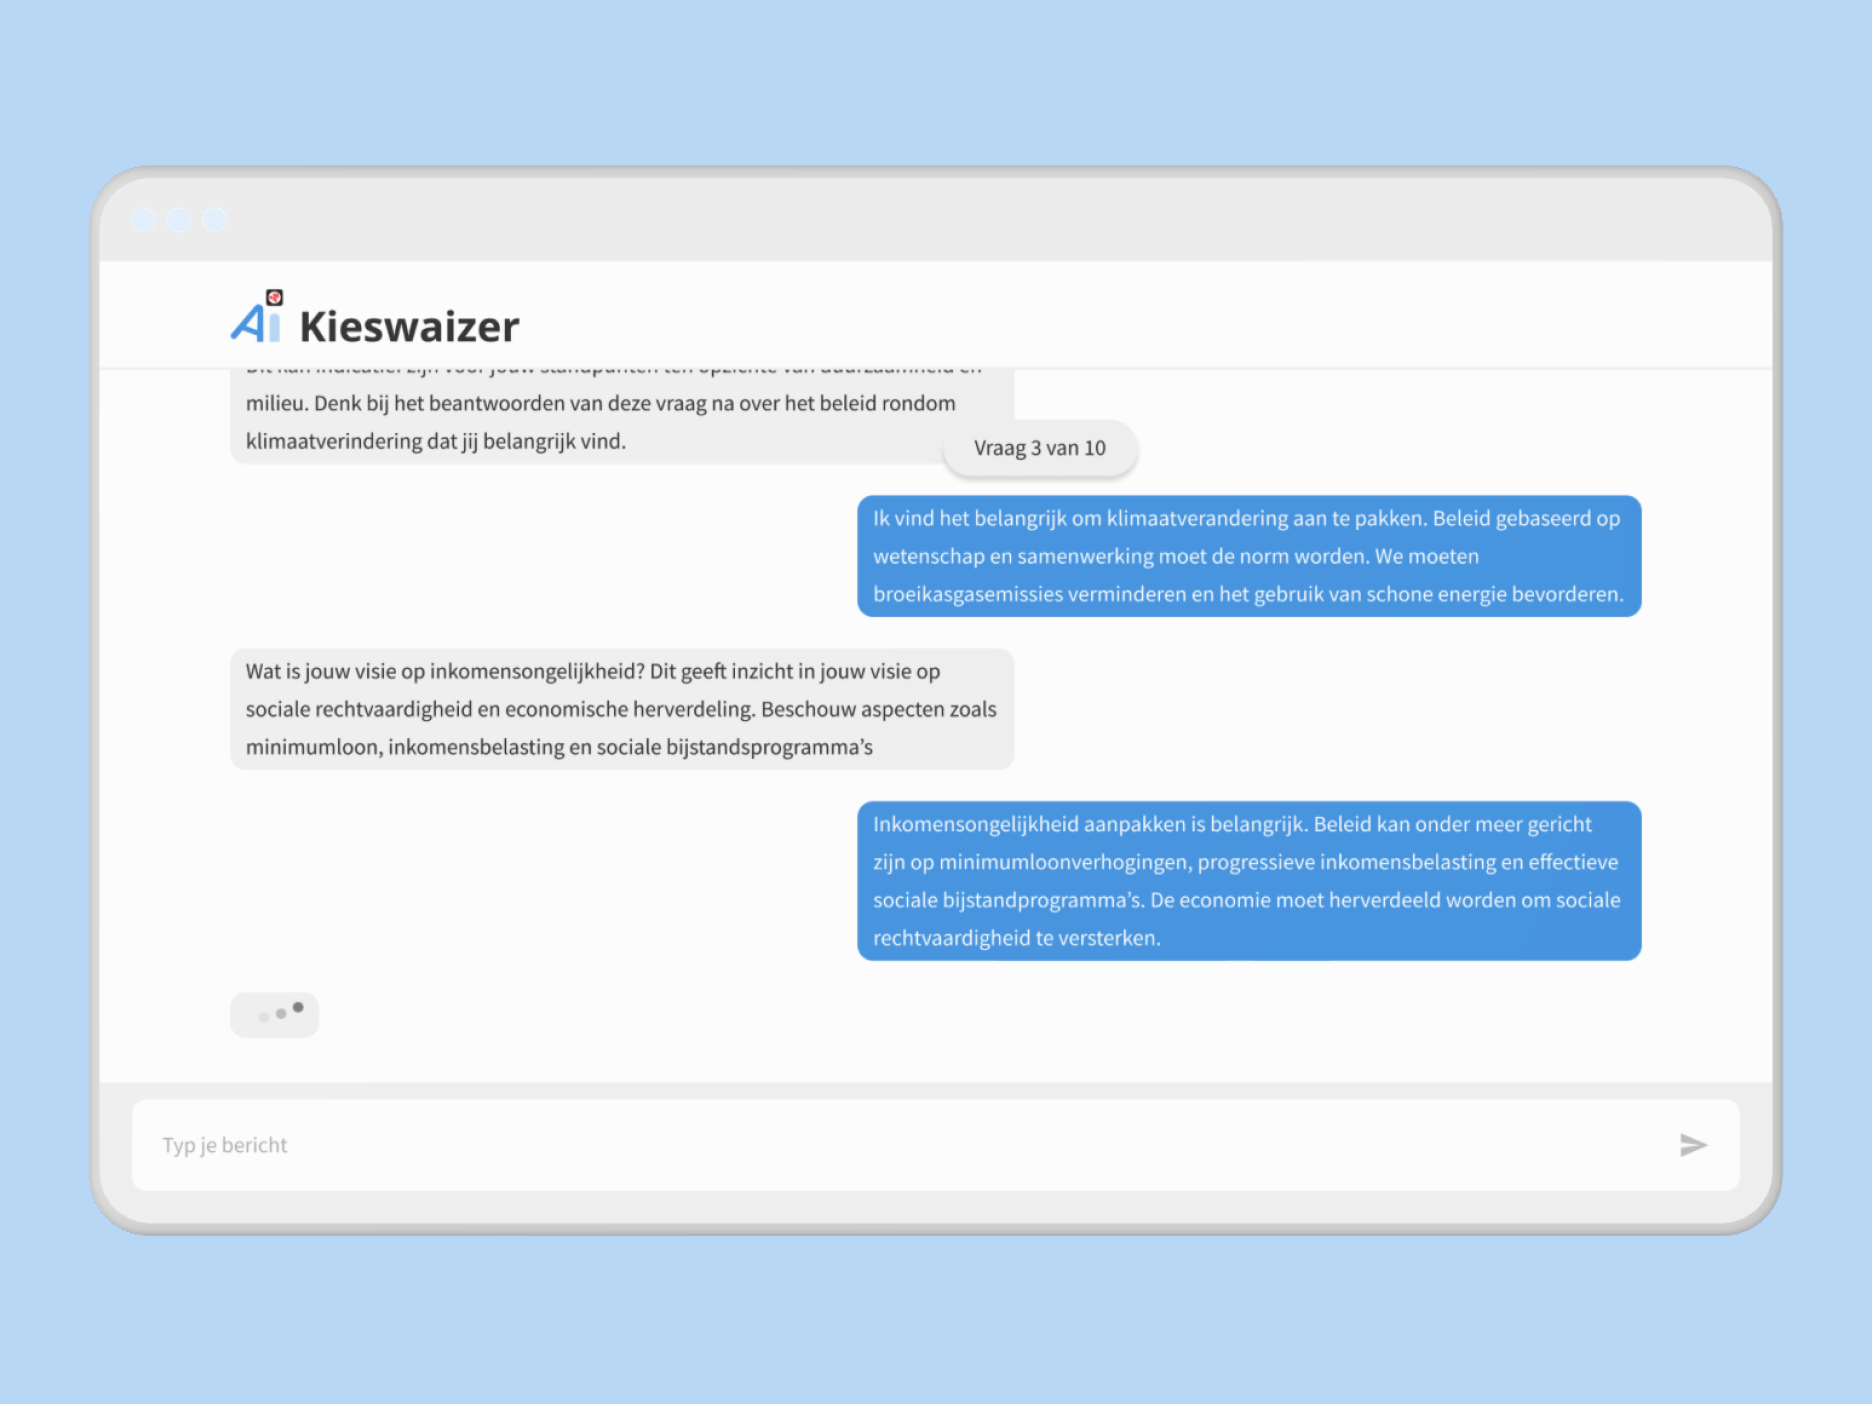 Chat and explore with Kieswaizer